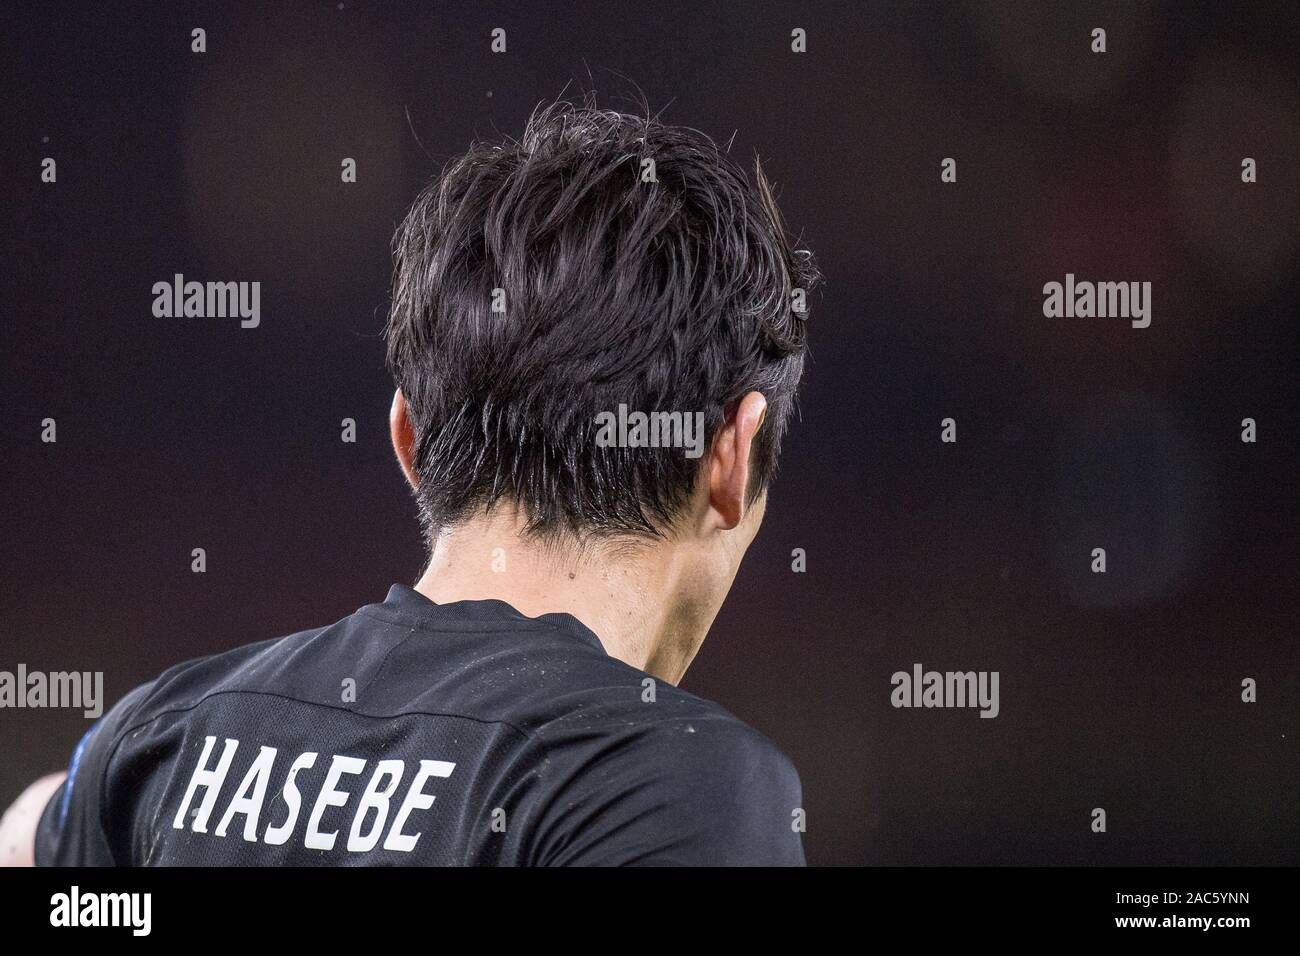 LONDON, ENGLAND - NOVEMBER 28: Makoto Hasebe of Eintracht Frankfurt looks on during the UEFA Europa League group F match between Arsenal FC and Eintra Stock Photo